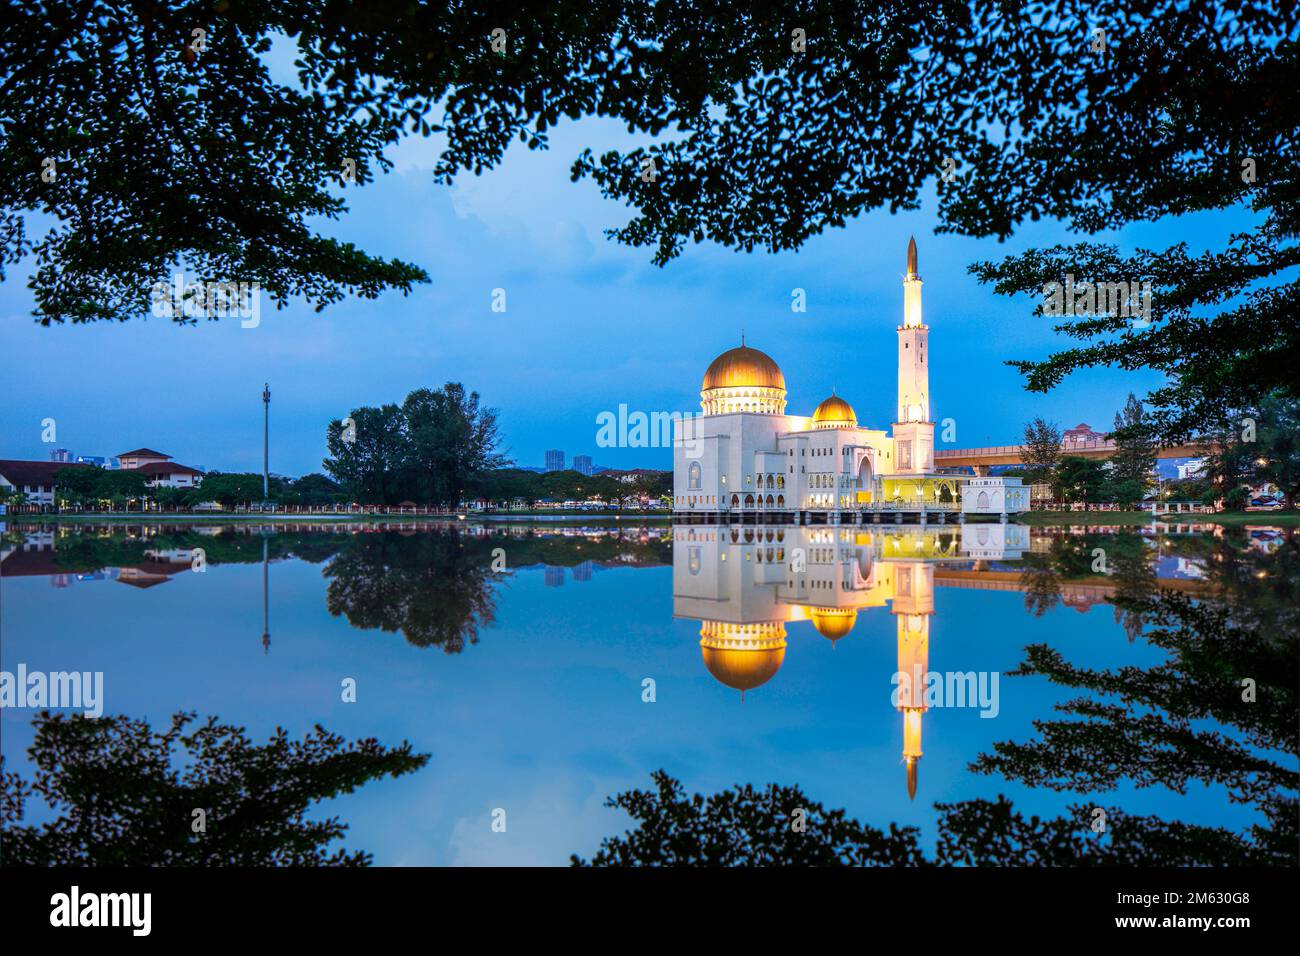 The framing of the mosque, Malaysia. Stock Photo